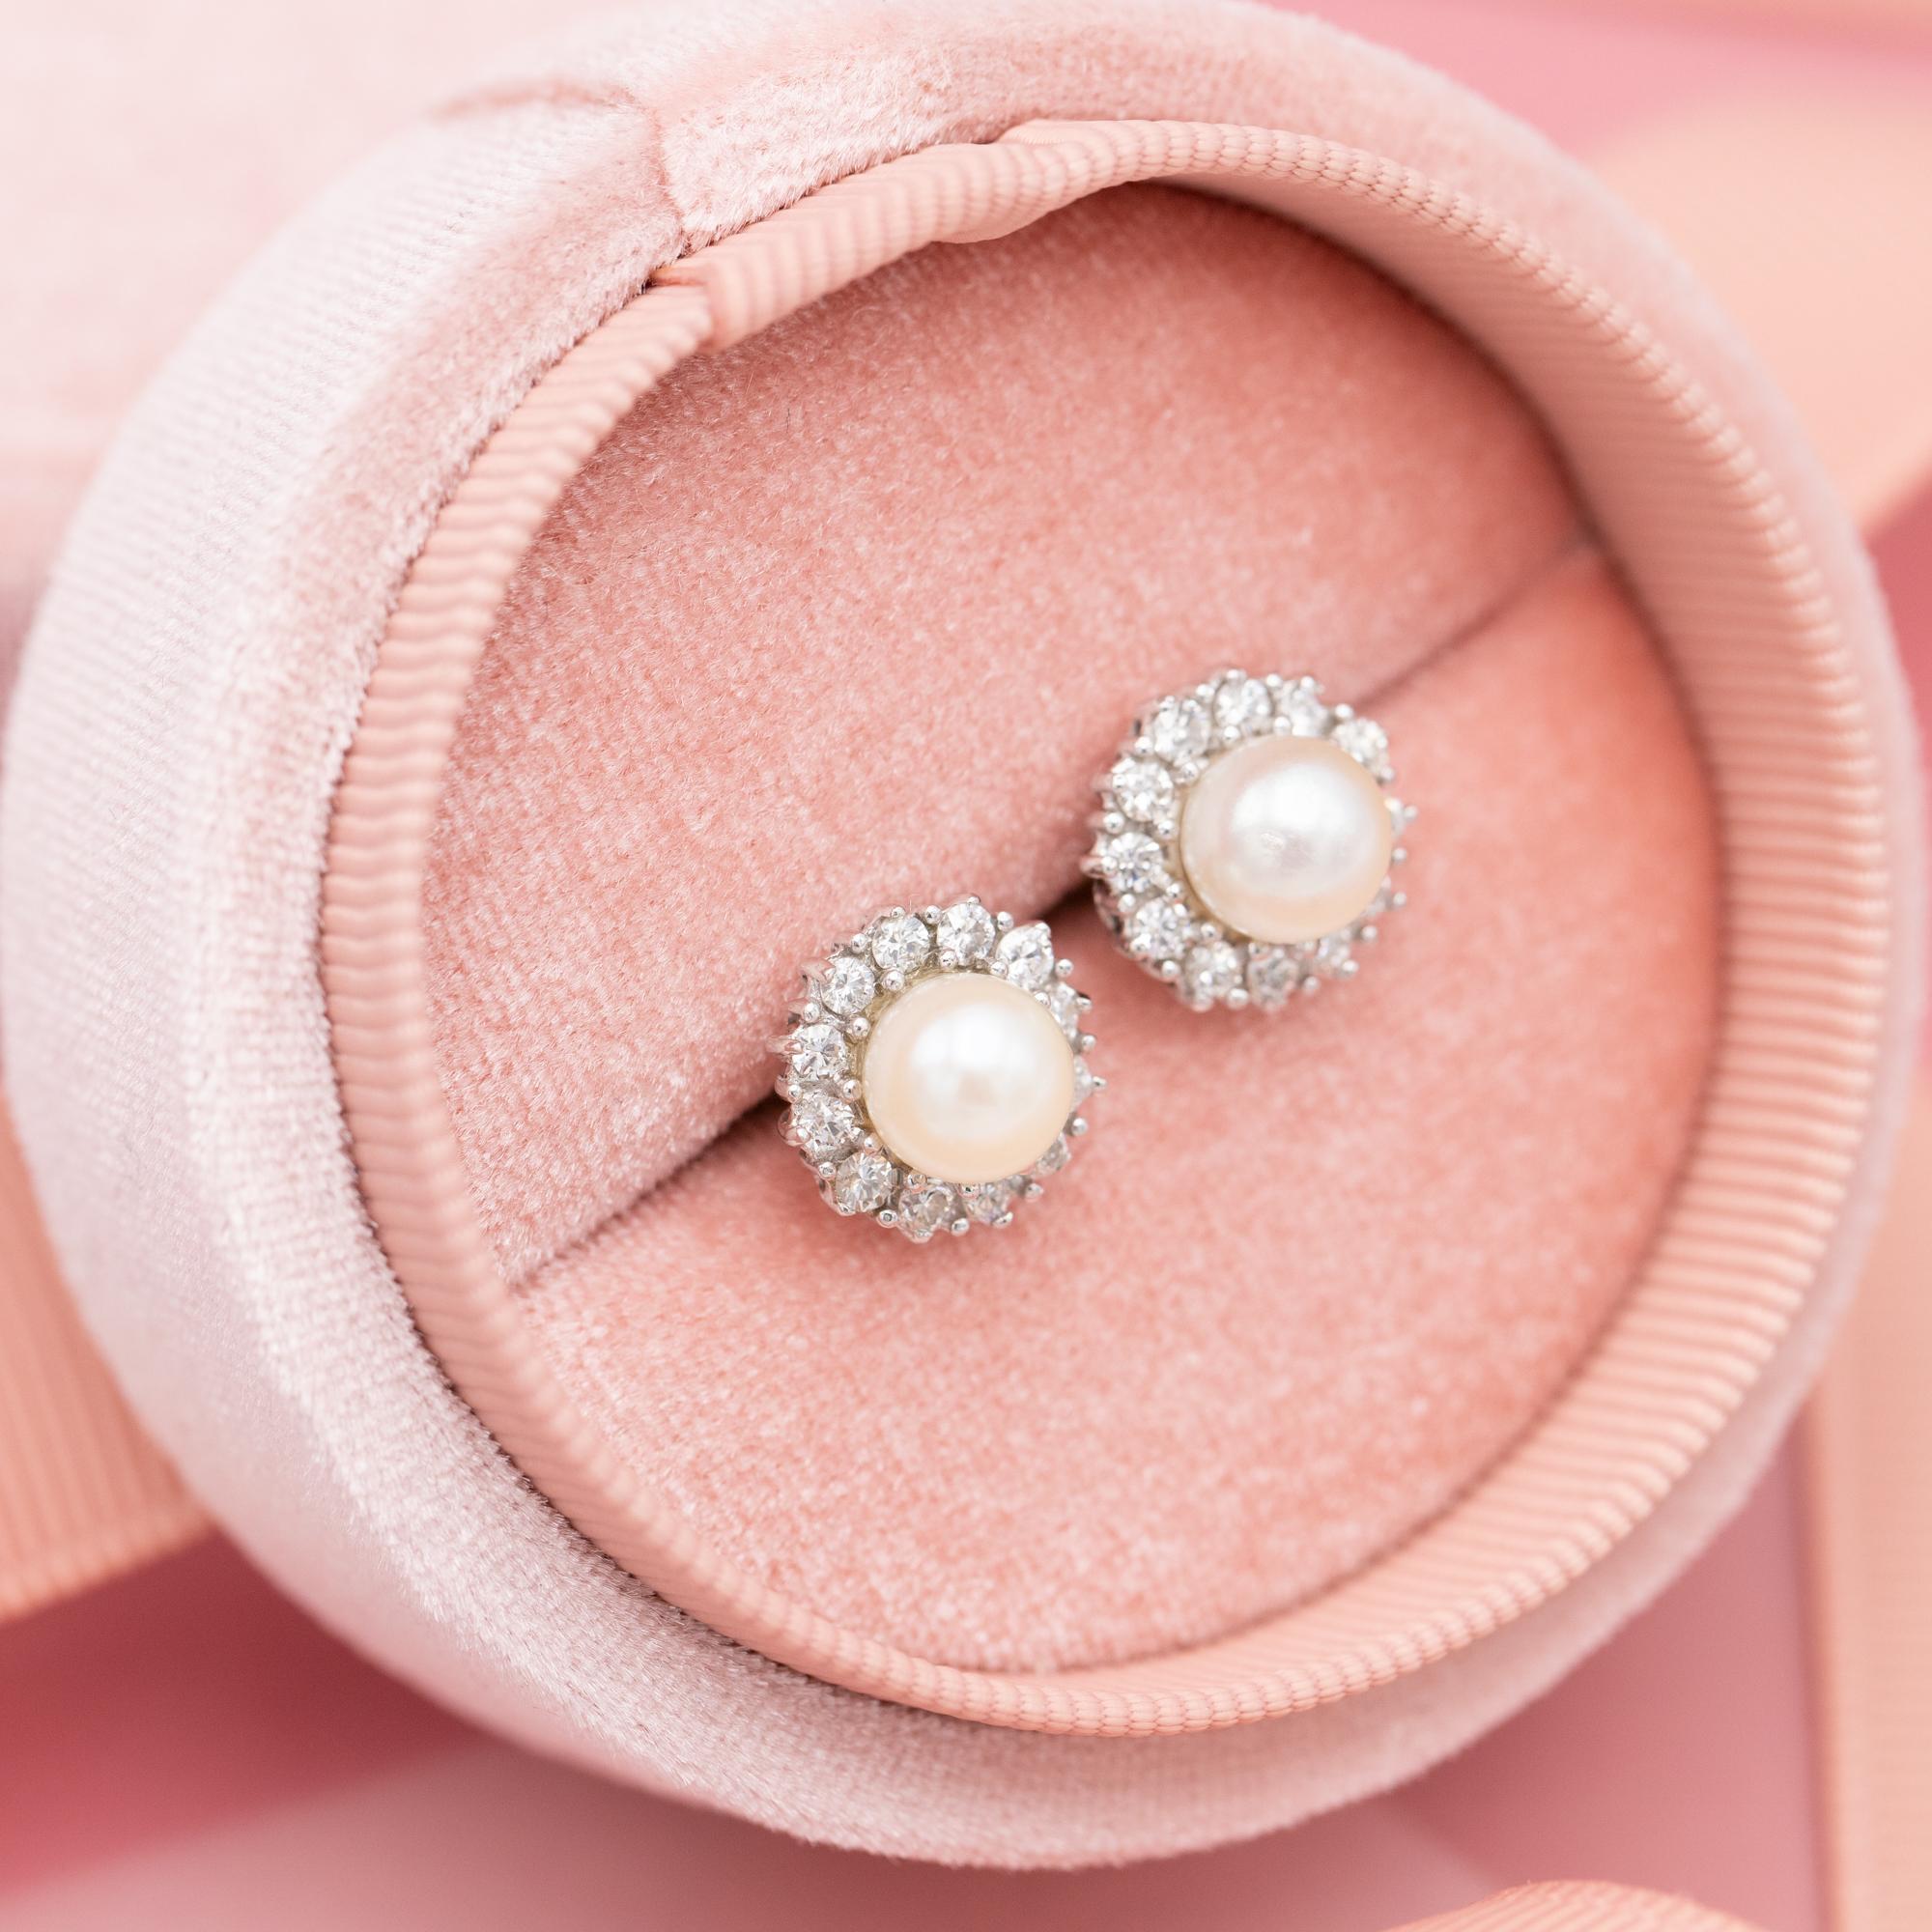 For sale is this 18 K white gold pair of diamond earrings. This beautiful pair is set with a total of twenty-four brilliant cut diamonds which combine for approximately 0,6ct. They are set in a floral composition in a white gold setting around a